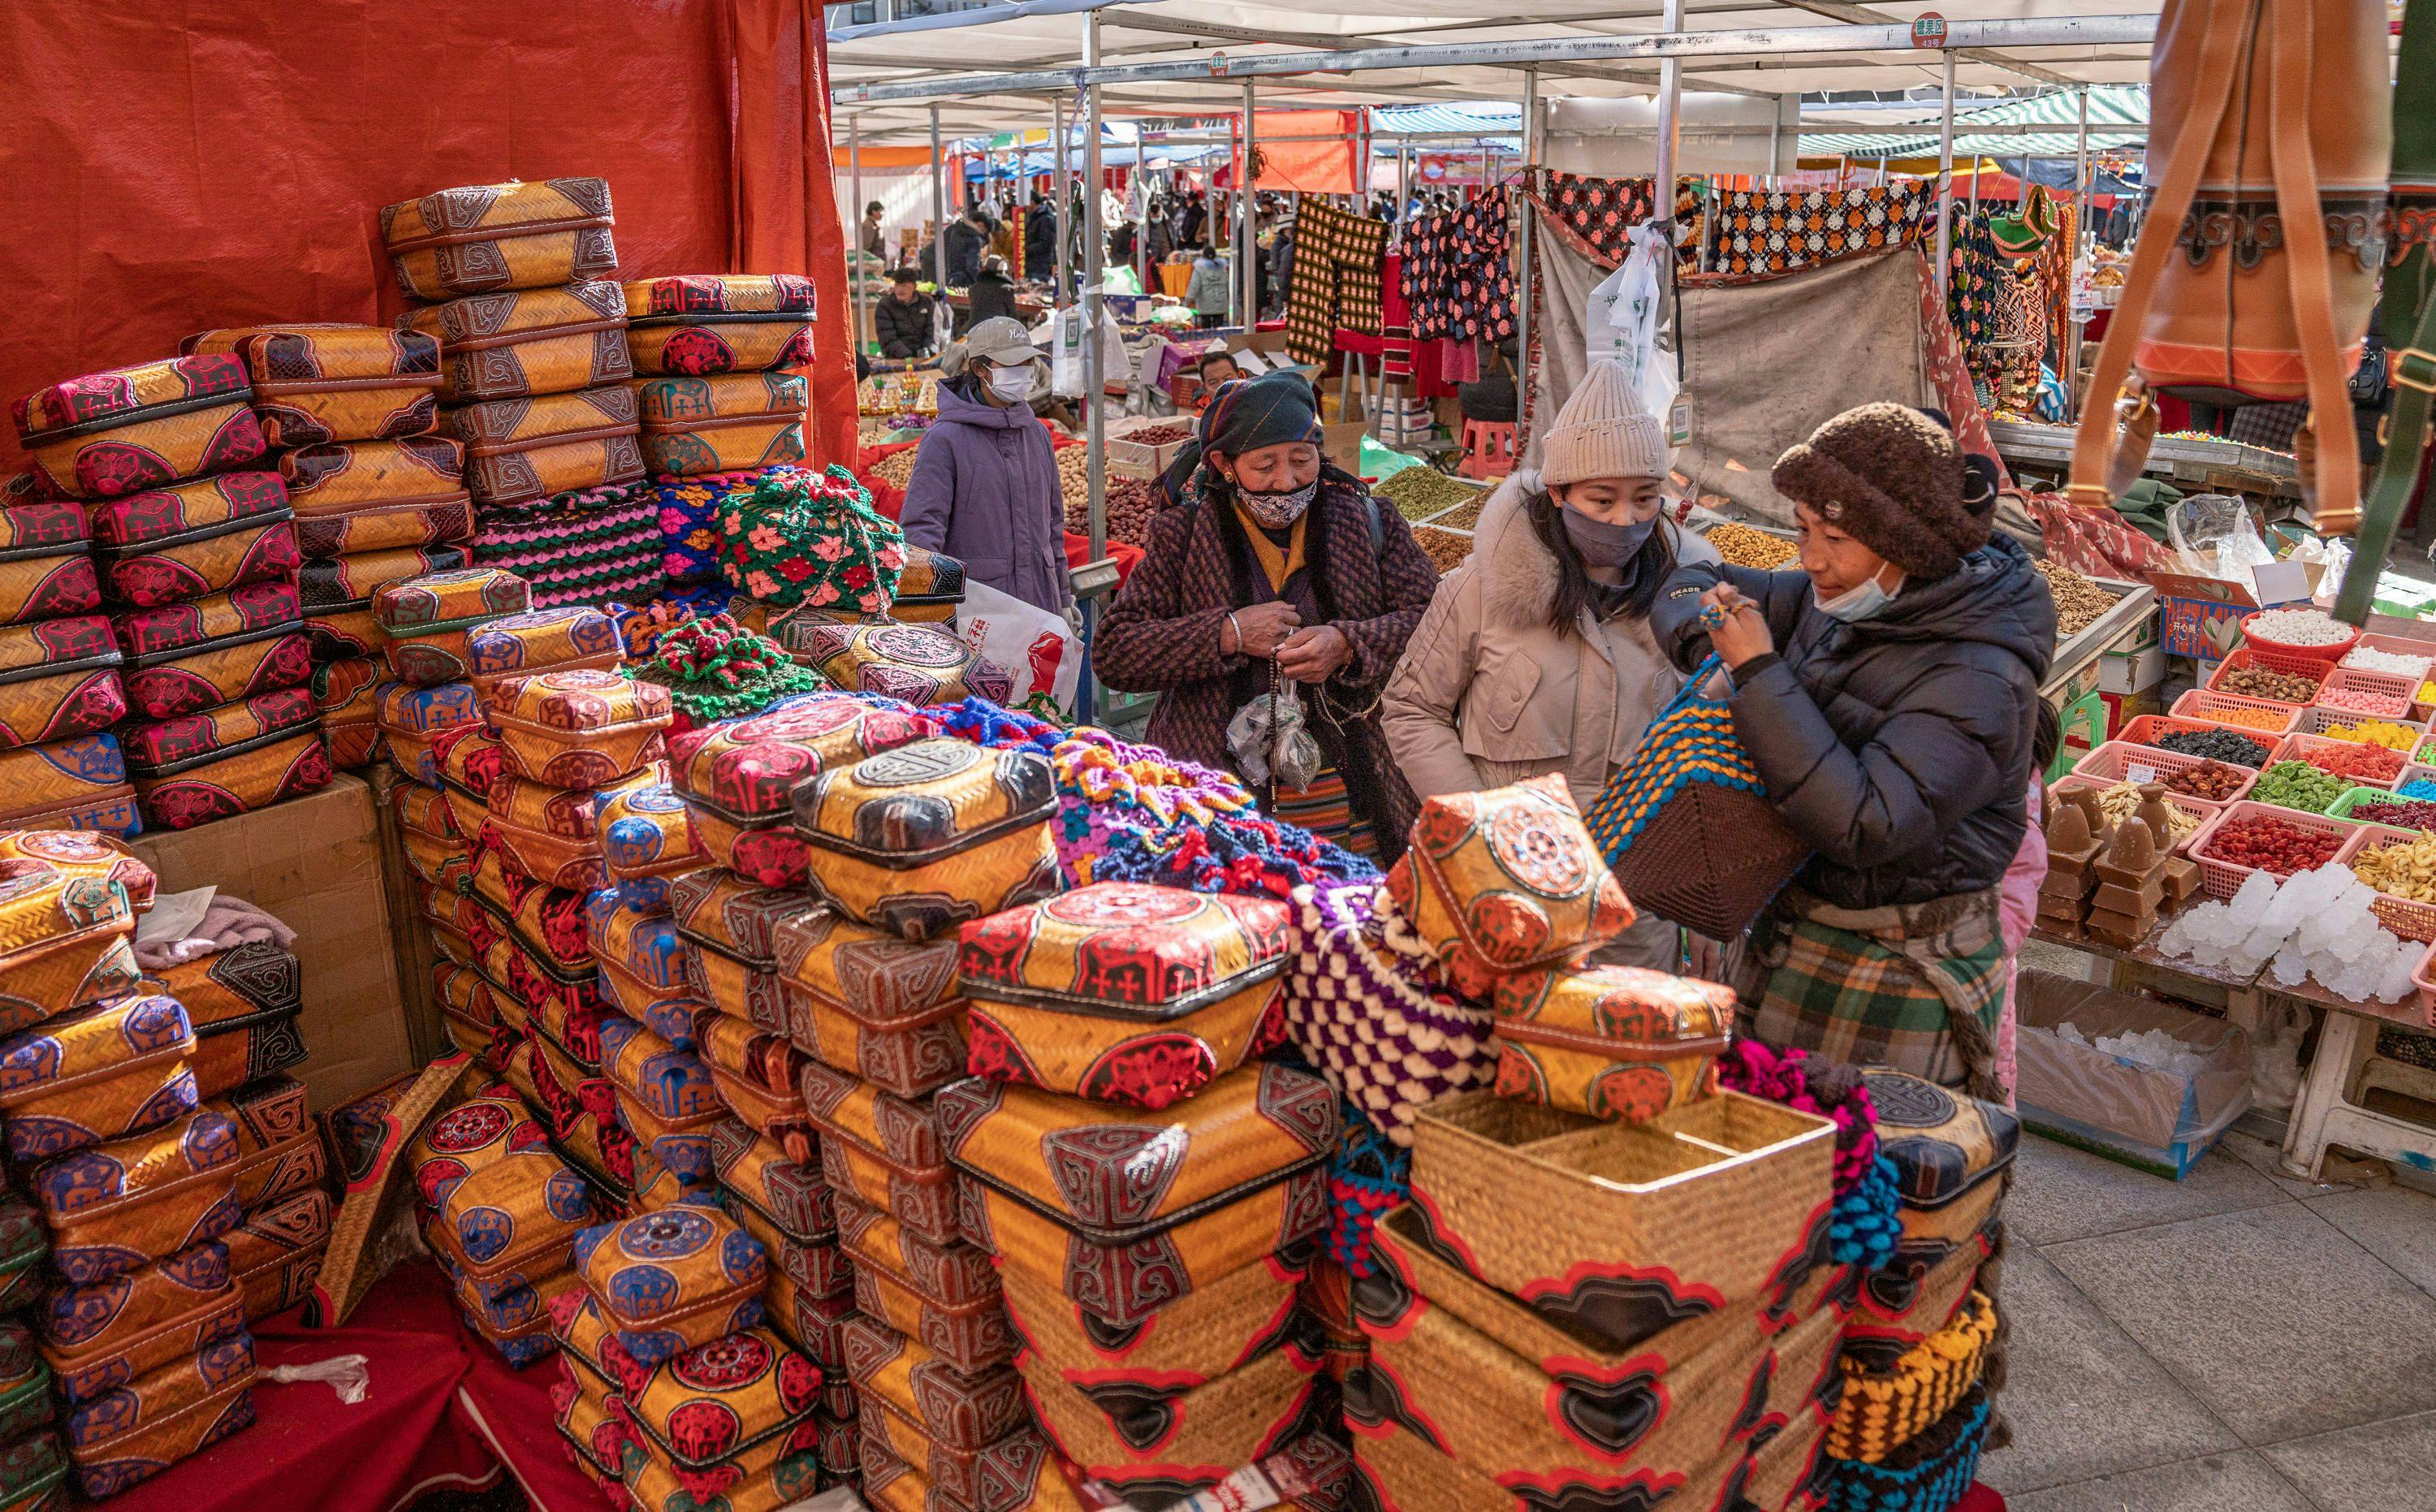 Locals in Xigaze celebrate the farmers New Year on the first day of the twelfth month of the Tibetan calendar, which falls on Jan. 12 this year. As the festival approaches, the streets and markets in Xigaze are exuding a cheerful and festive atmosphere.